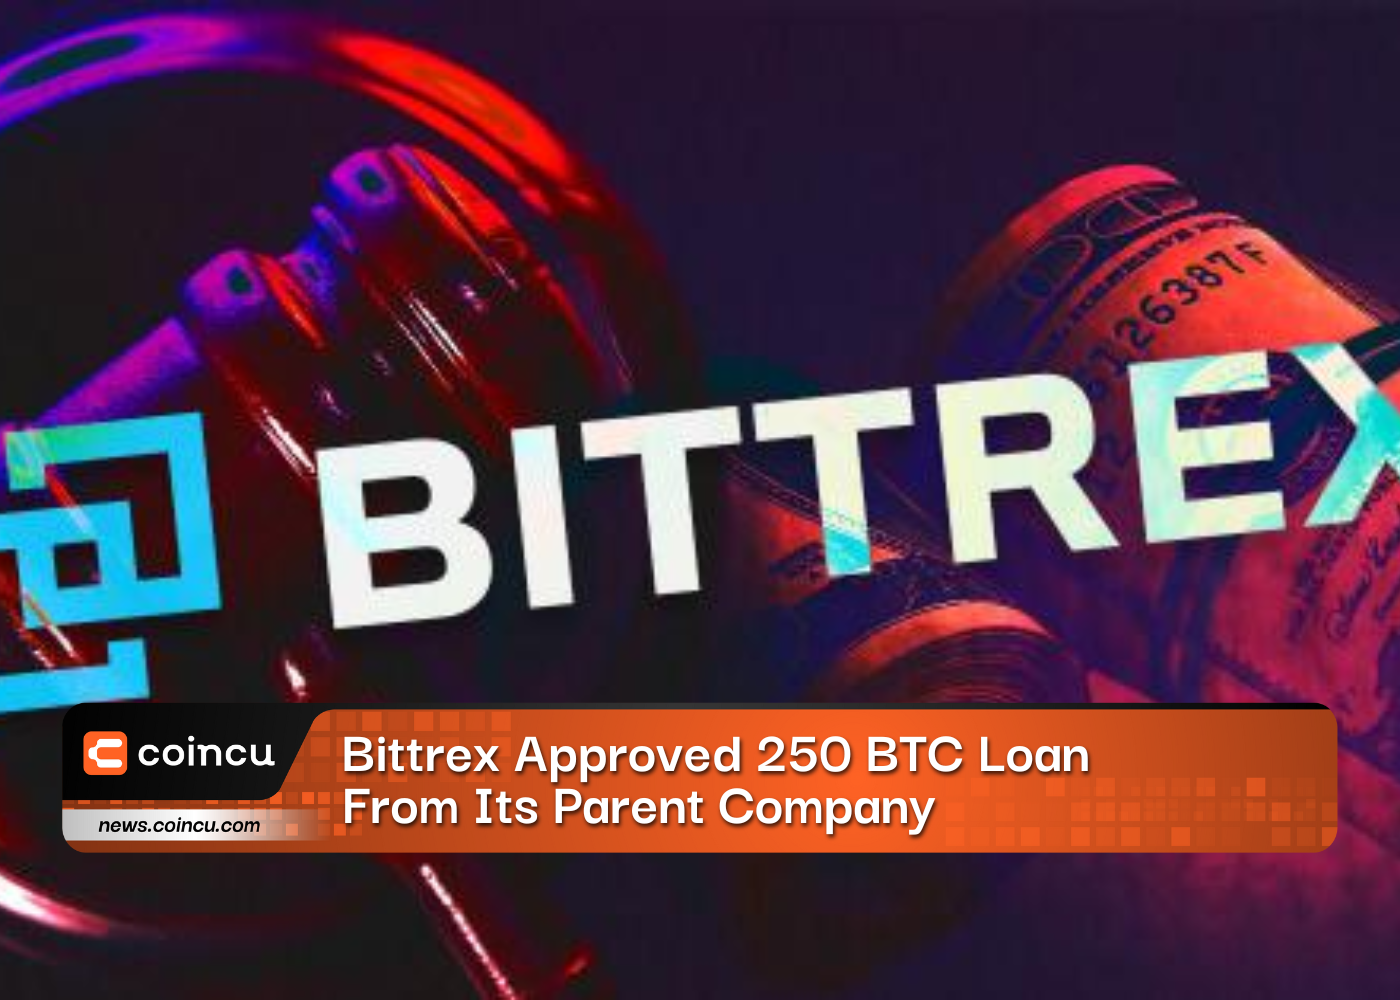 Bittrex Approved 250 BTC Loan From Its Parent Company